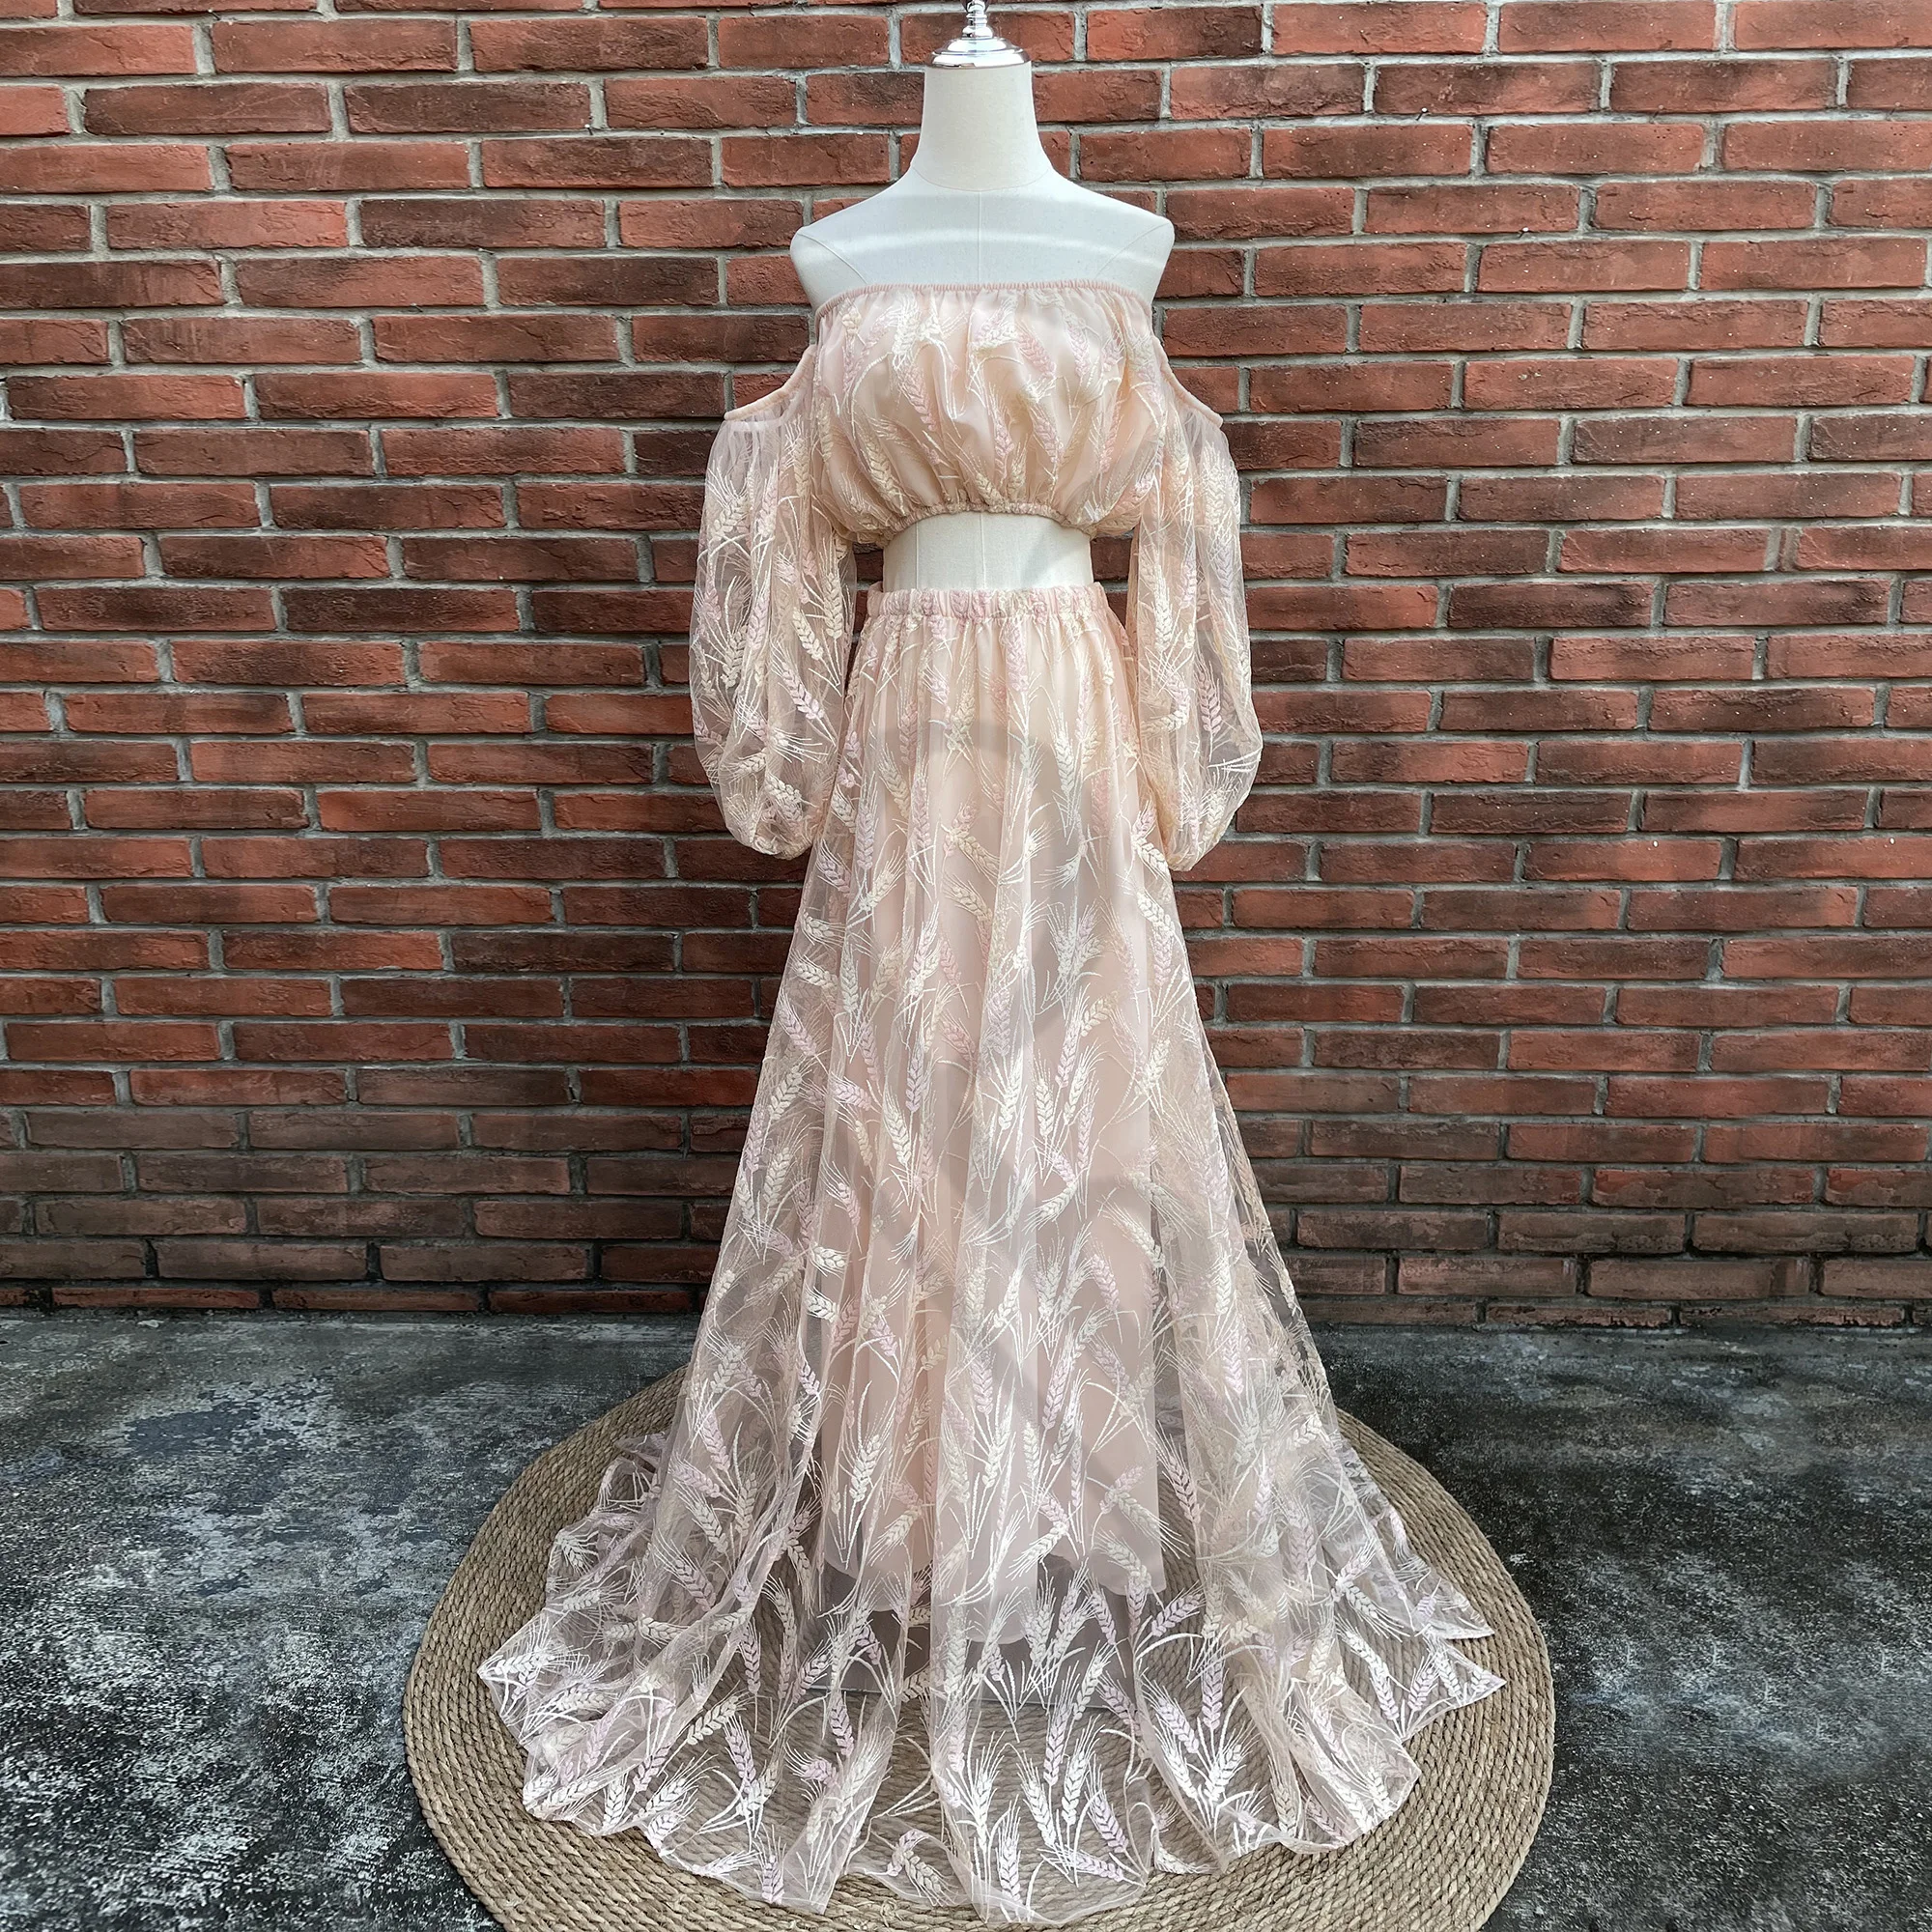 A Suit Photo Shoot Props Maternity Dress Pregnant Wheat Mesh Gown Maxi Robe for Woman Photography Accessories Baby Shower Gift